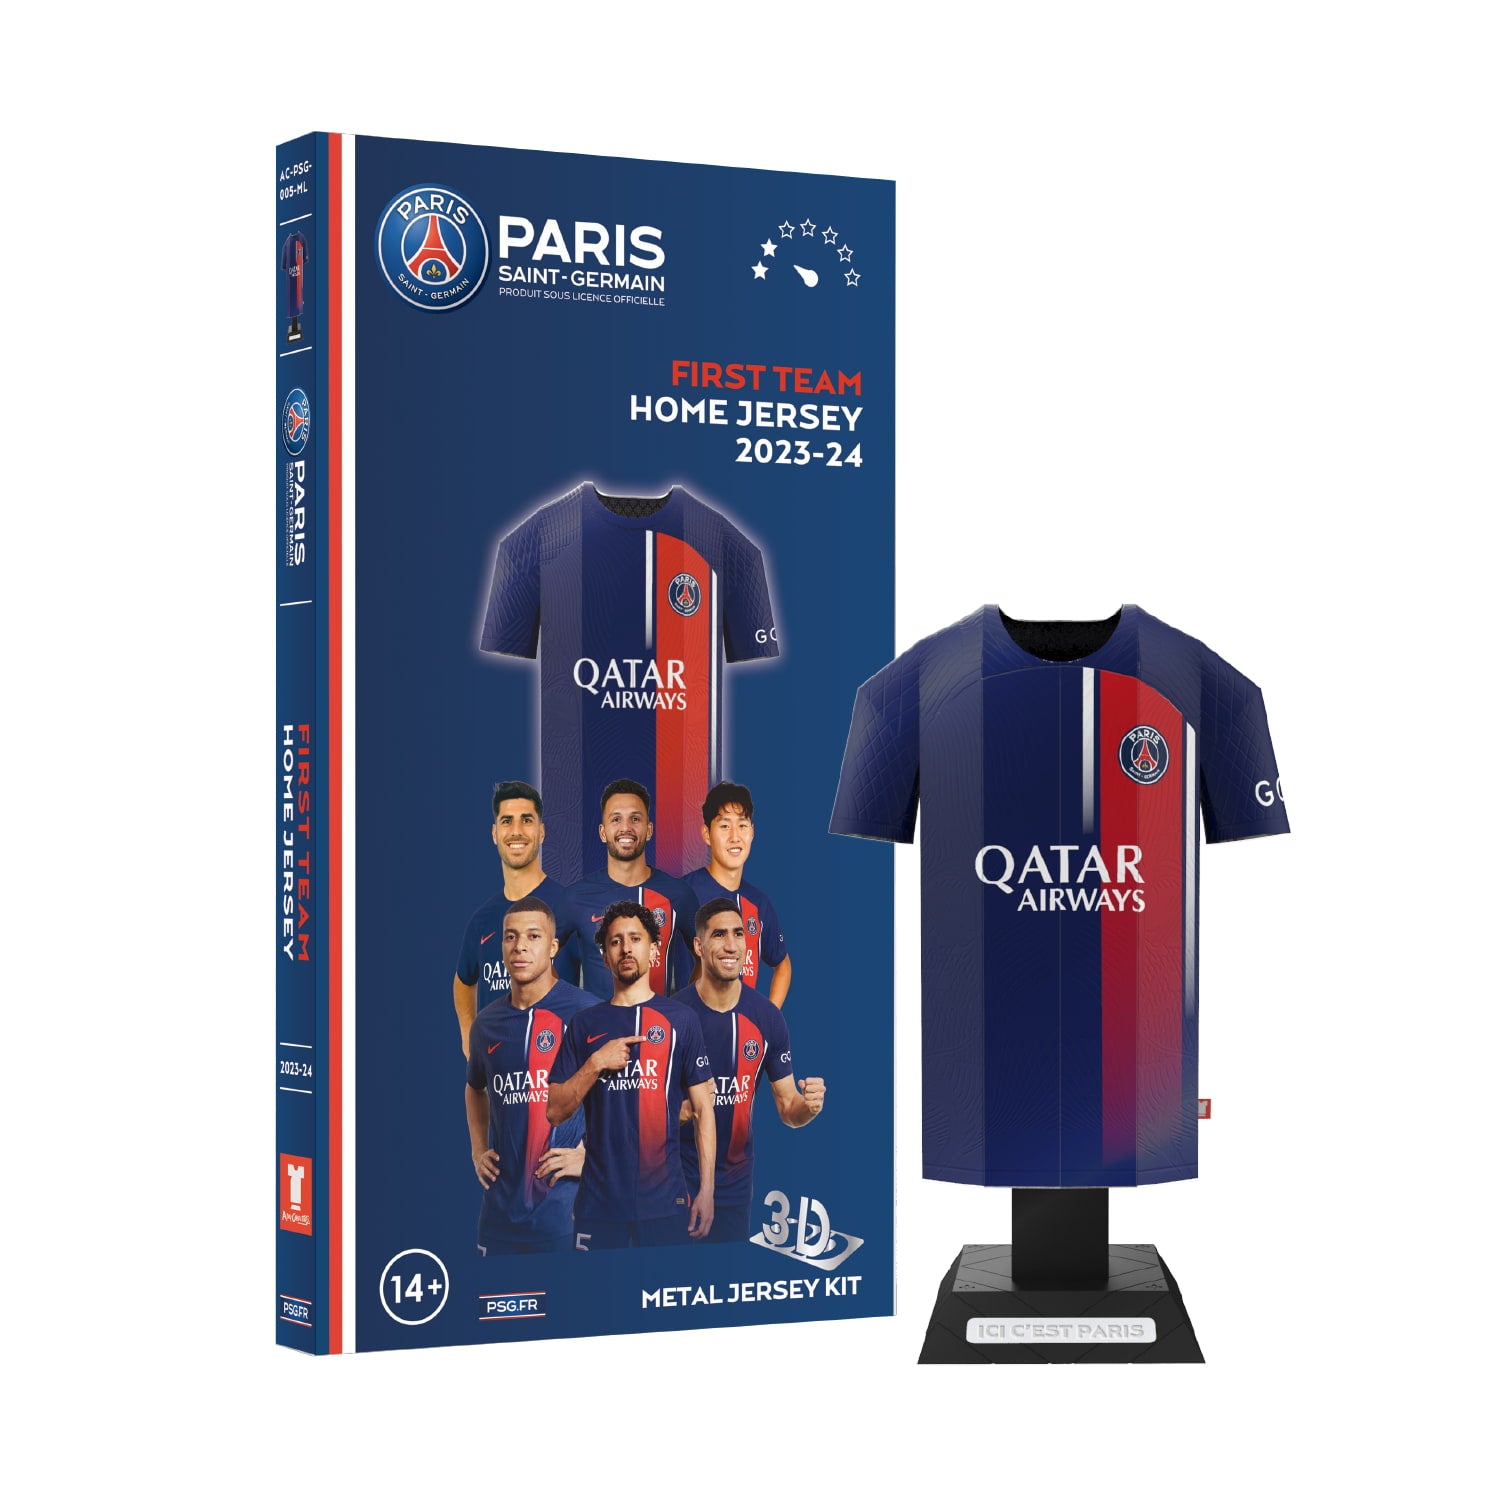 PSG home jersey with packaging